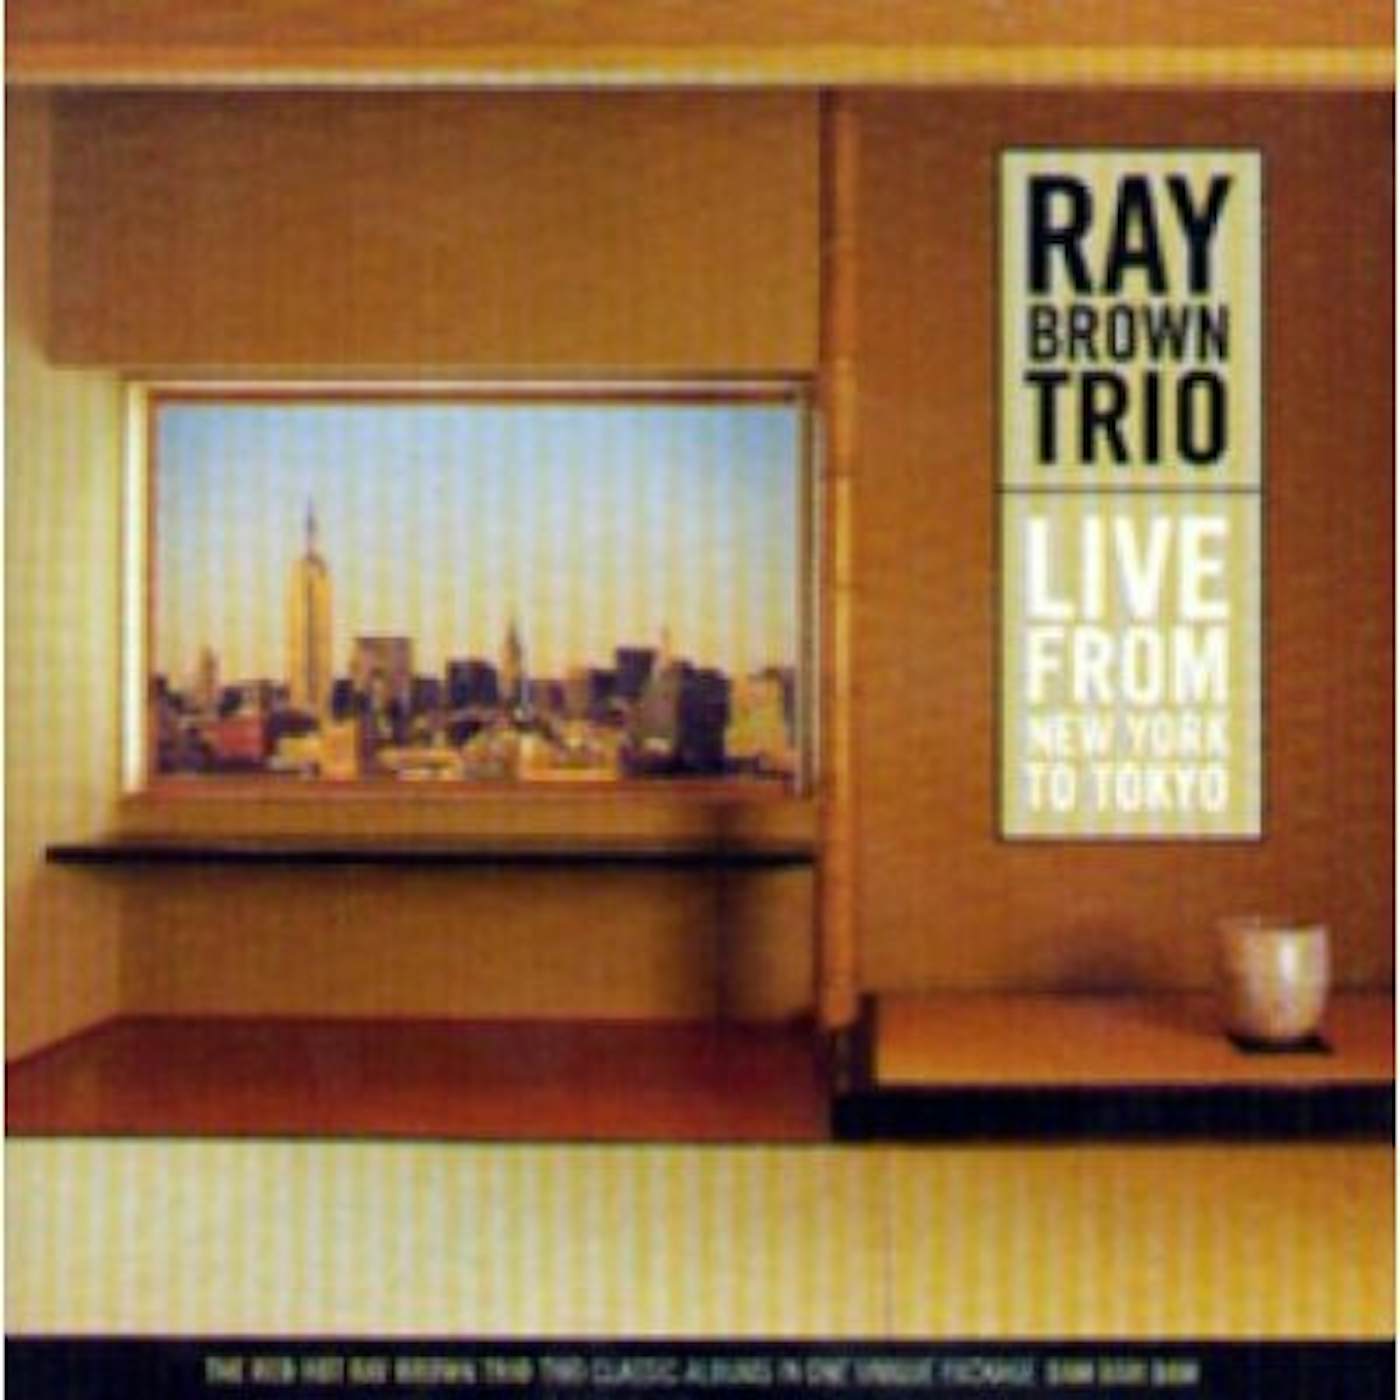 Ray Brown Trio LIVE FROM NEW YORK TO TOKYO CD